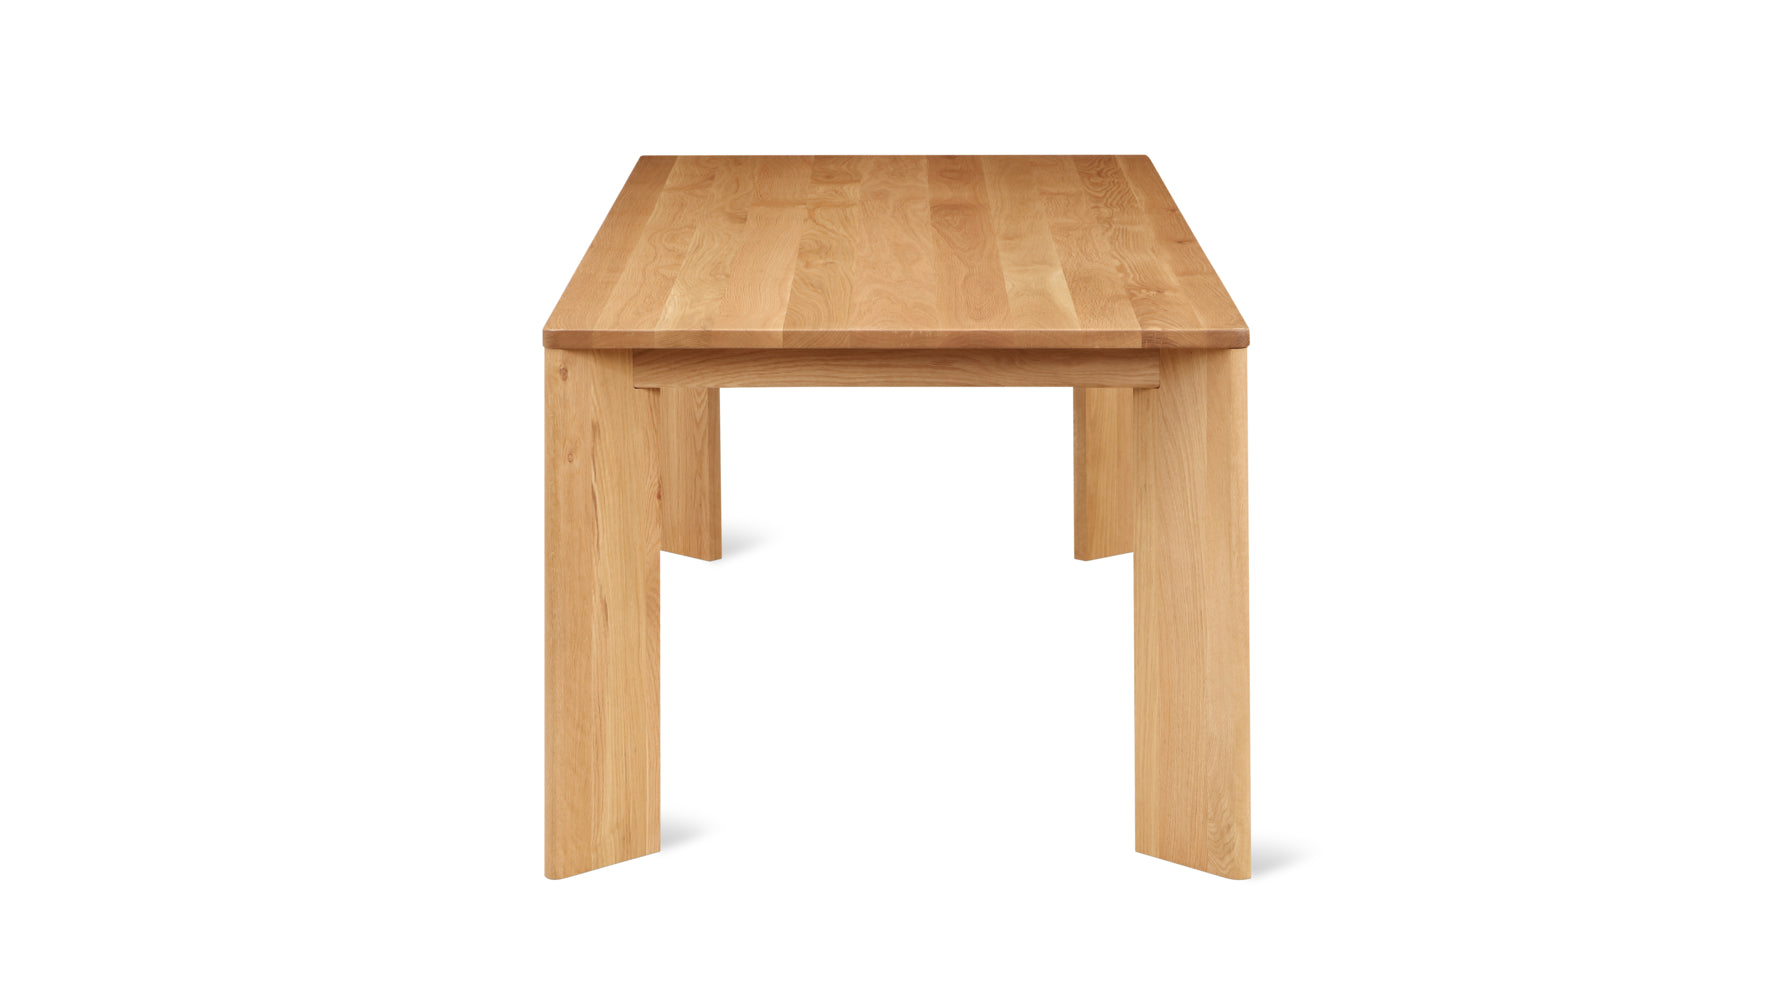 Frame Dining Table, Seats 6-8 People, Oak - Image 5